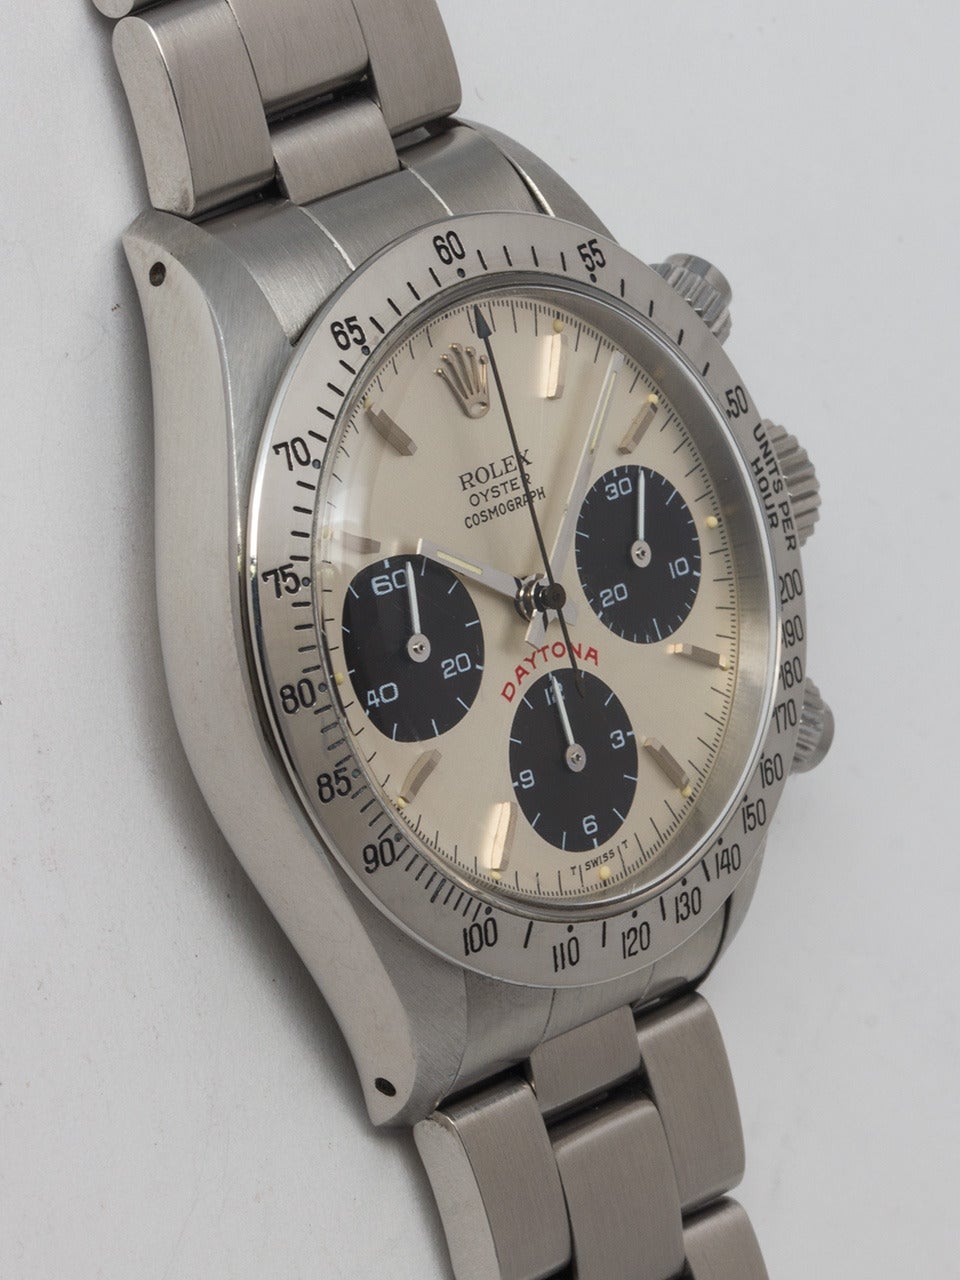 Rolex stainless steel Daytona wristwatch, Ref. 6265, serial number 6.3 million, circa 1980. 36.5 mm diameter case with steel tachometer bezel and acrylic crystal. Pristine original silvered satin dial with contrasting black registers and Daytona